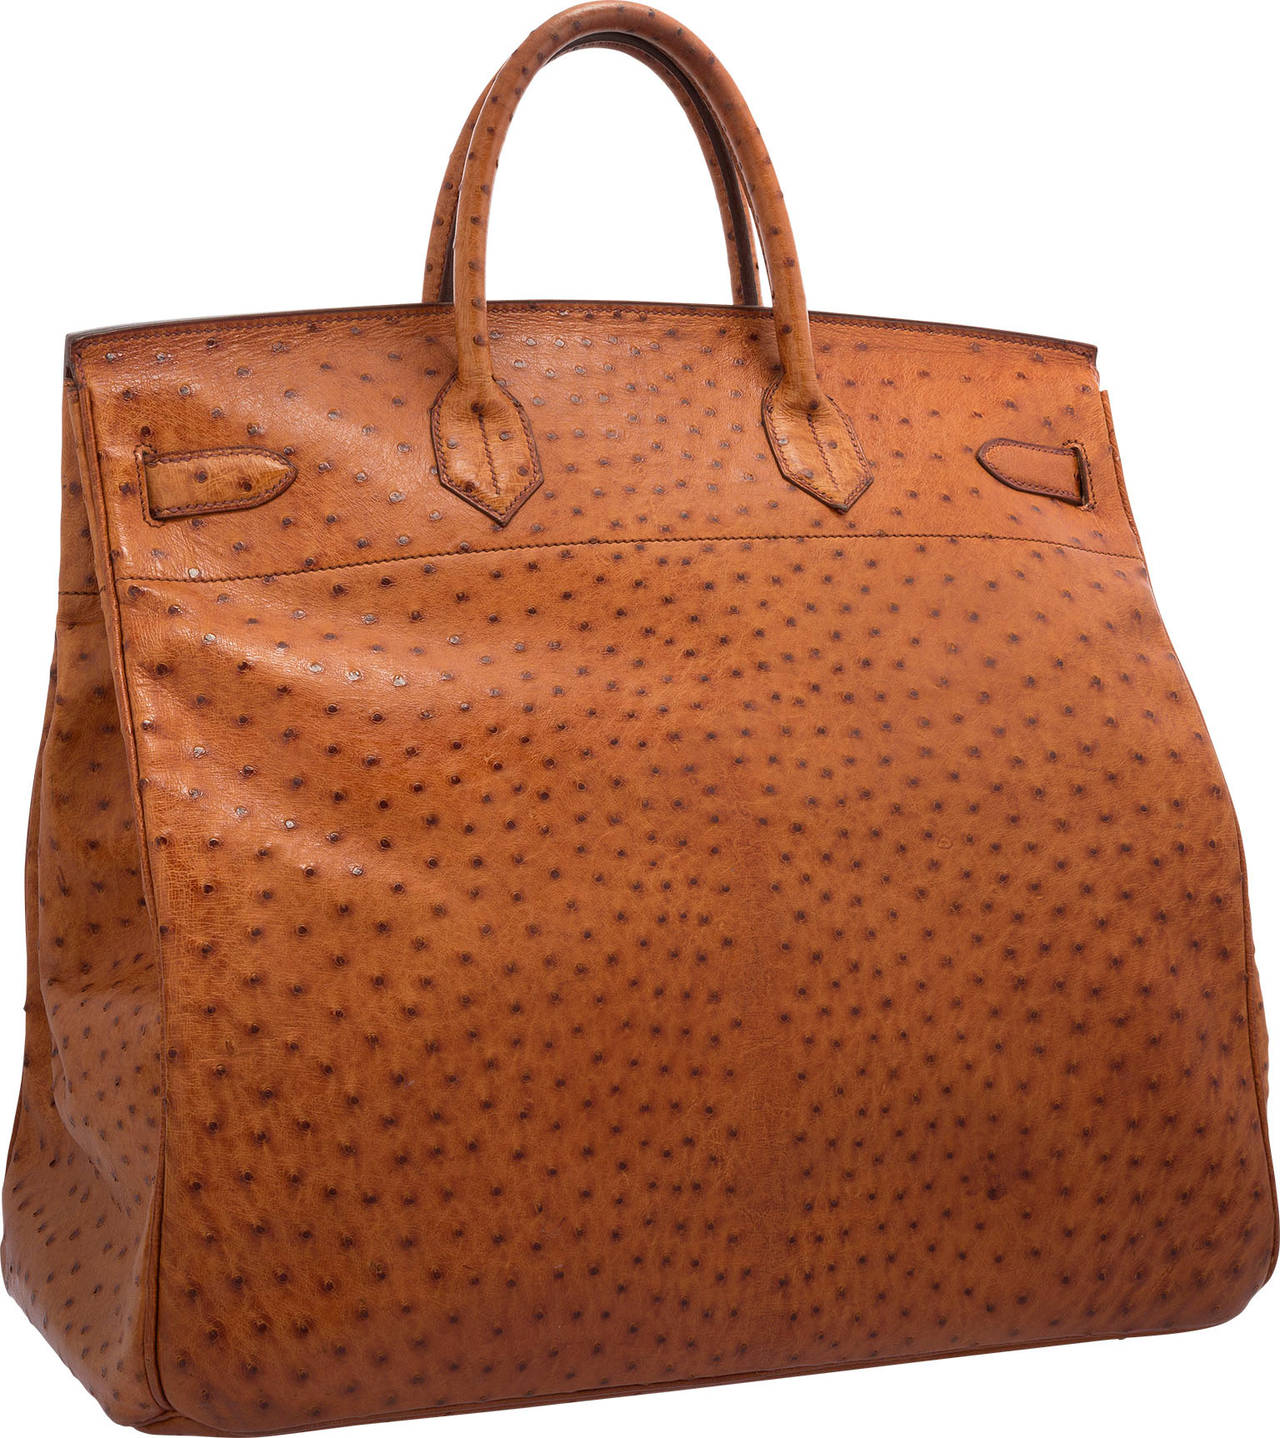 Hermes 45cm Cognac Ostrich HAC Birkin Bag with Gold Hardware In Good Condition For Sale In New York, NY